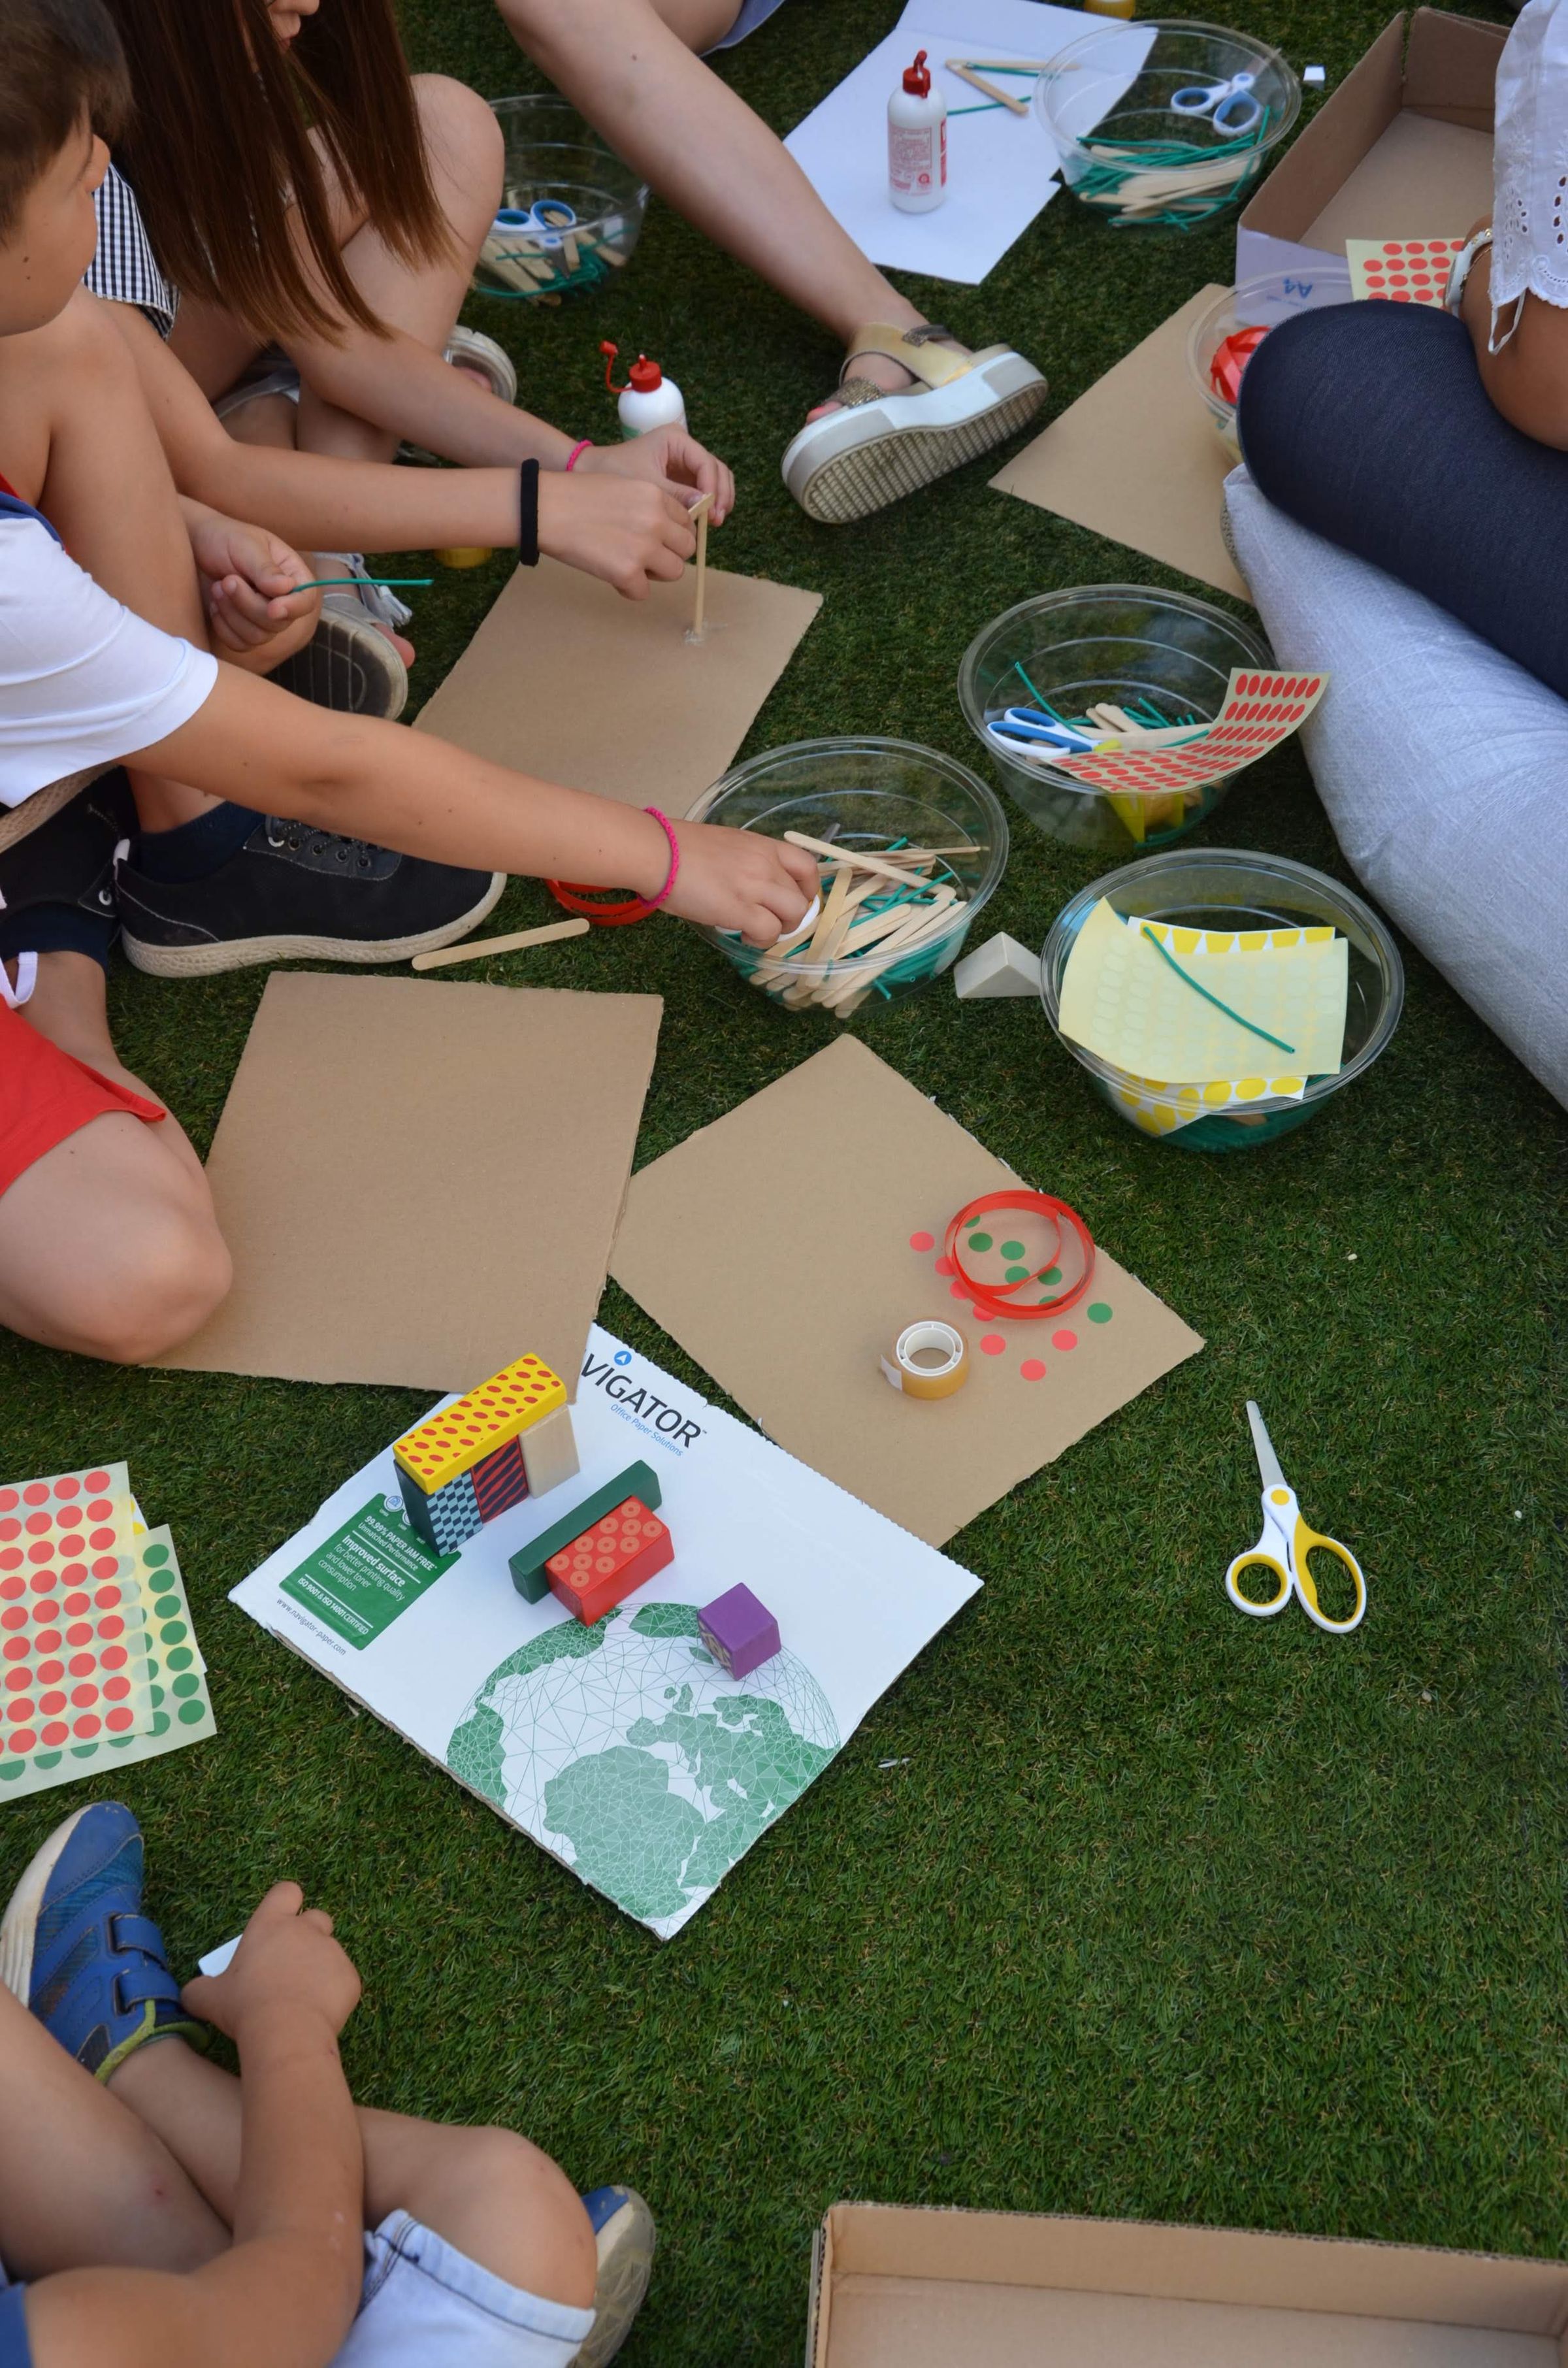 A close up of children's hands and legs, seating on synthetic grass and creating craft from coloured stickers and paddle-pop sticks on brown paper